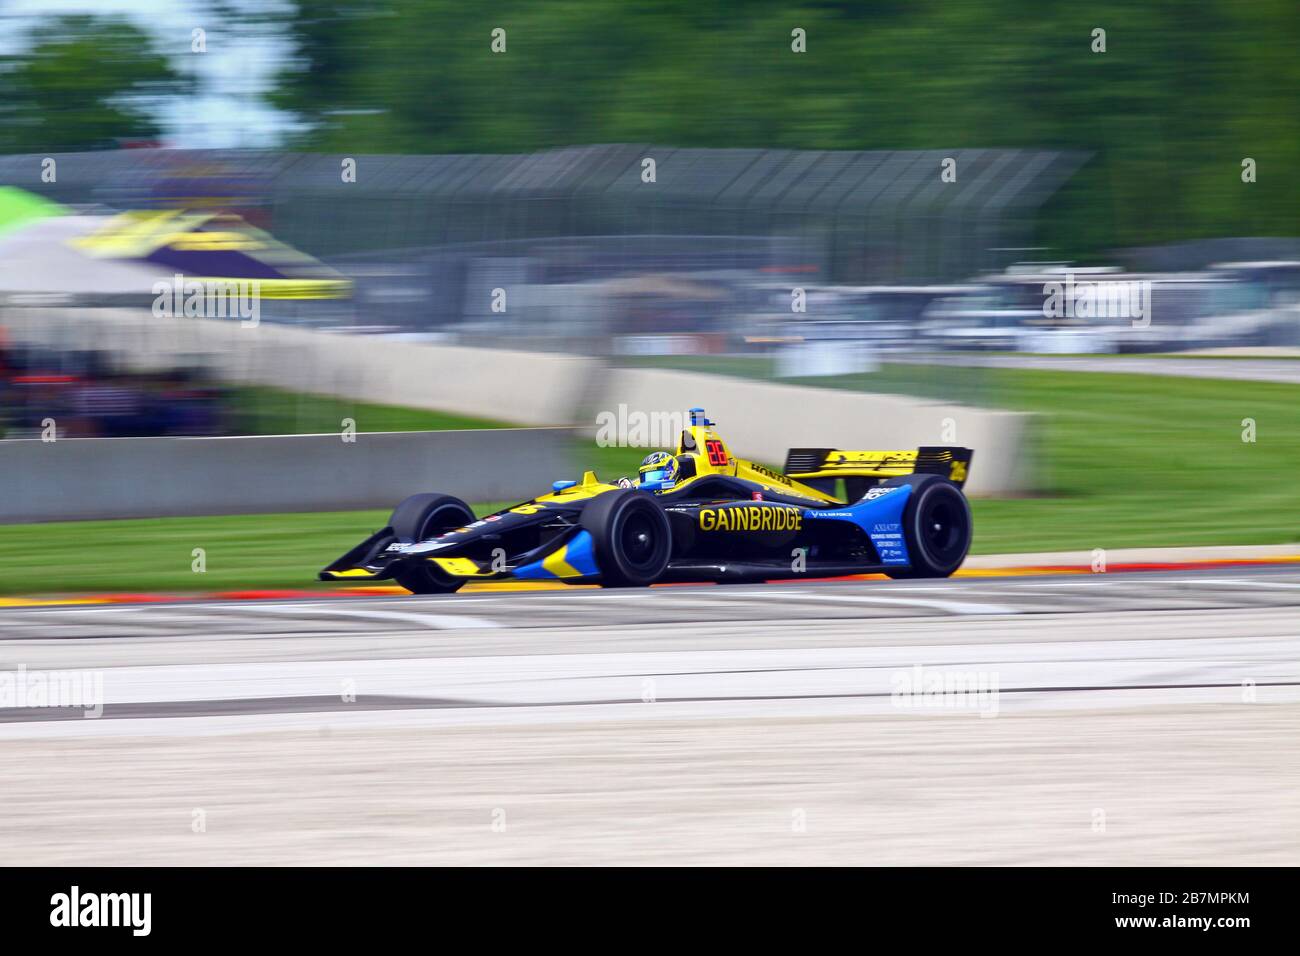 Elkhart Lake, Wisconsin - June 22, 2019: 26 Zach Veach, USA, Andretti Autosport, REV Group Grand Prix at Road America, qualifying for the race. Stock Photo